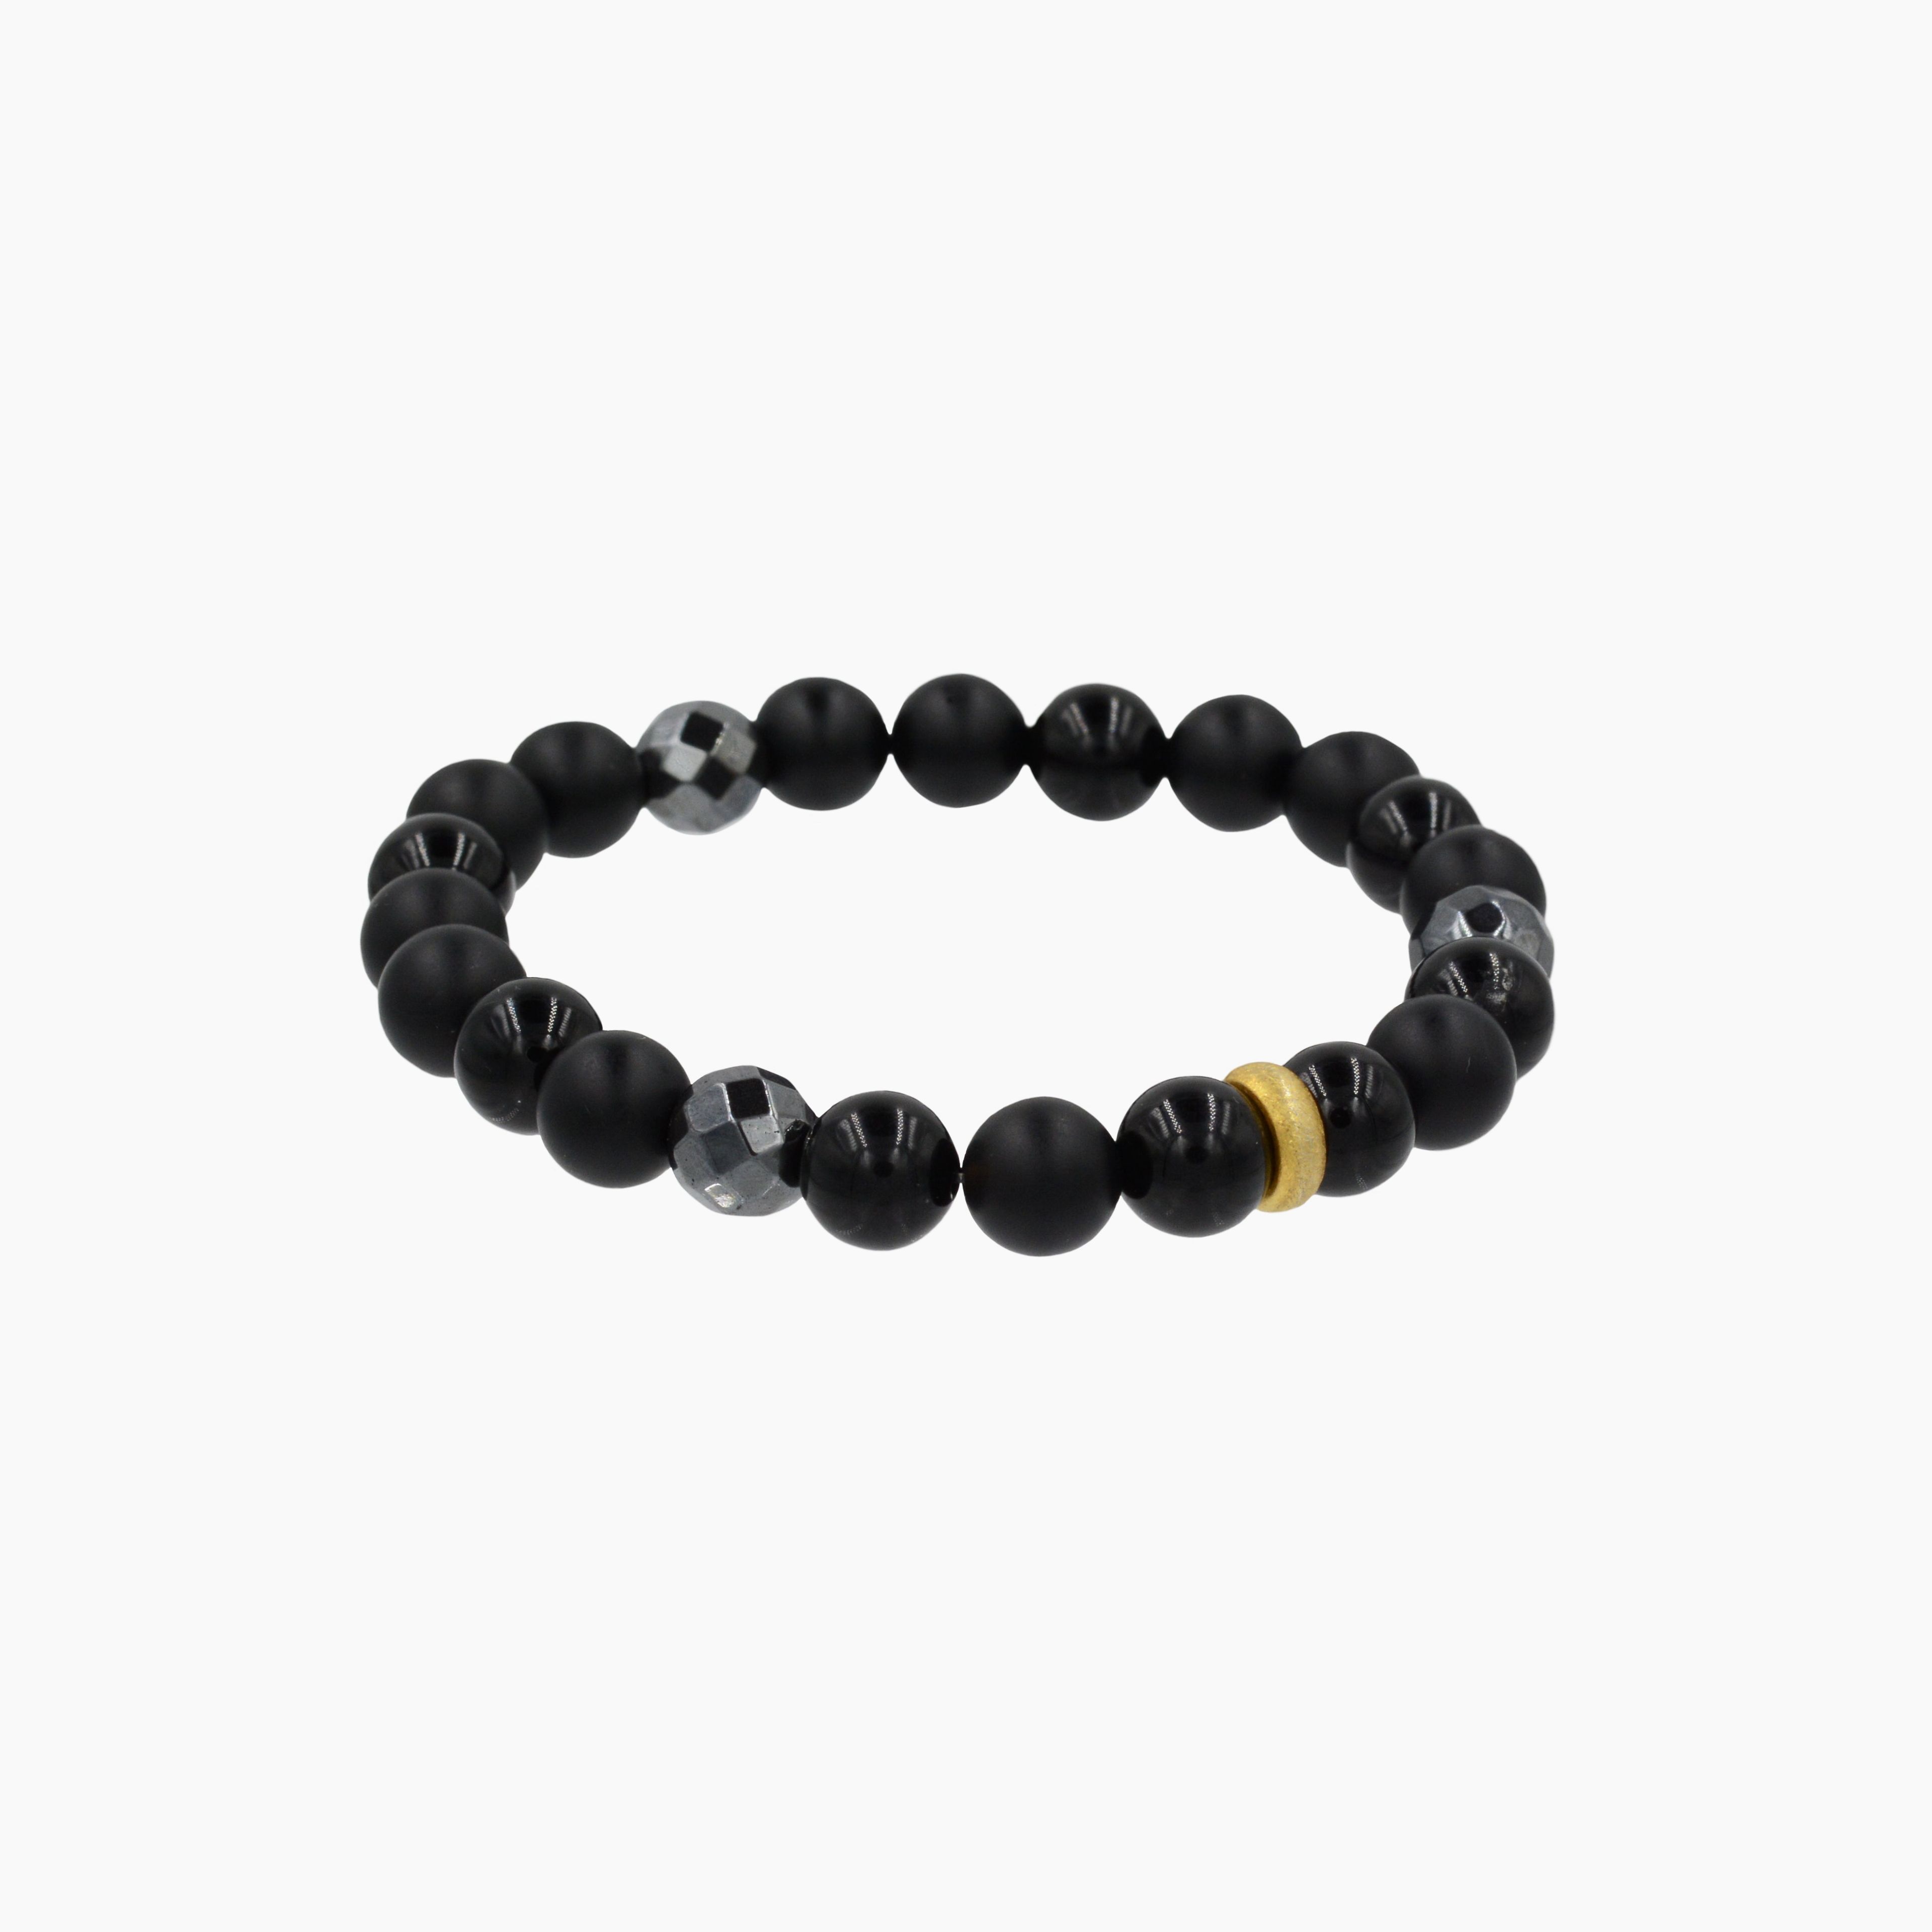 Black Onyx Bracelet with Gold Bead Accents